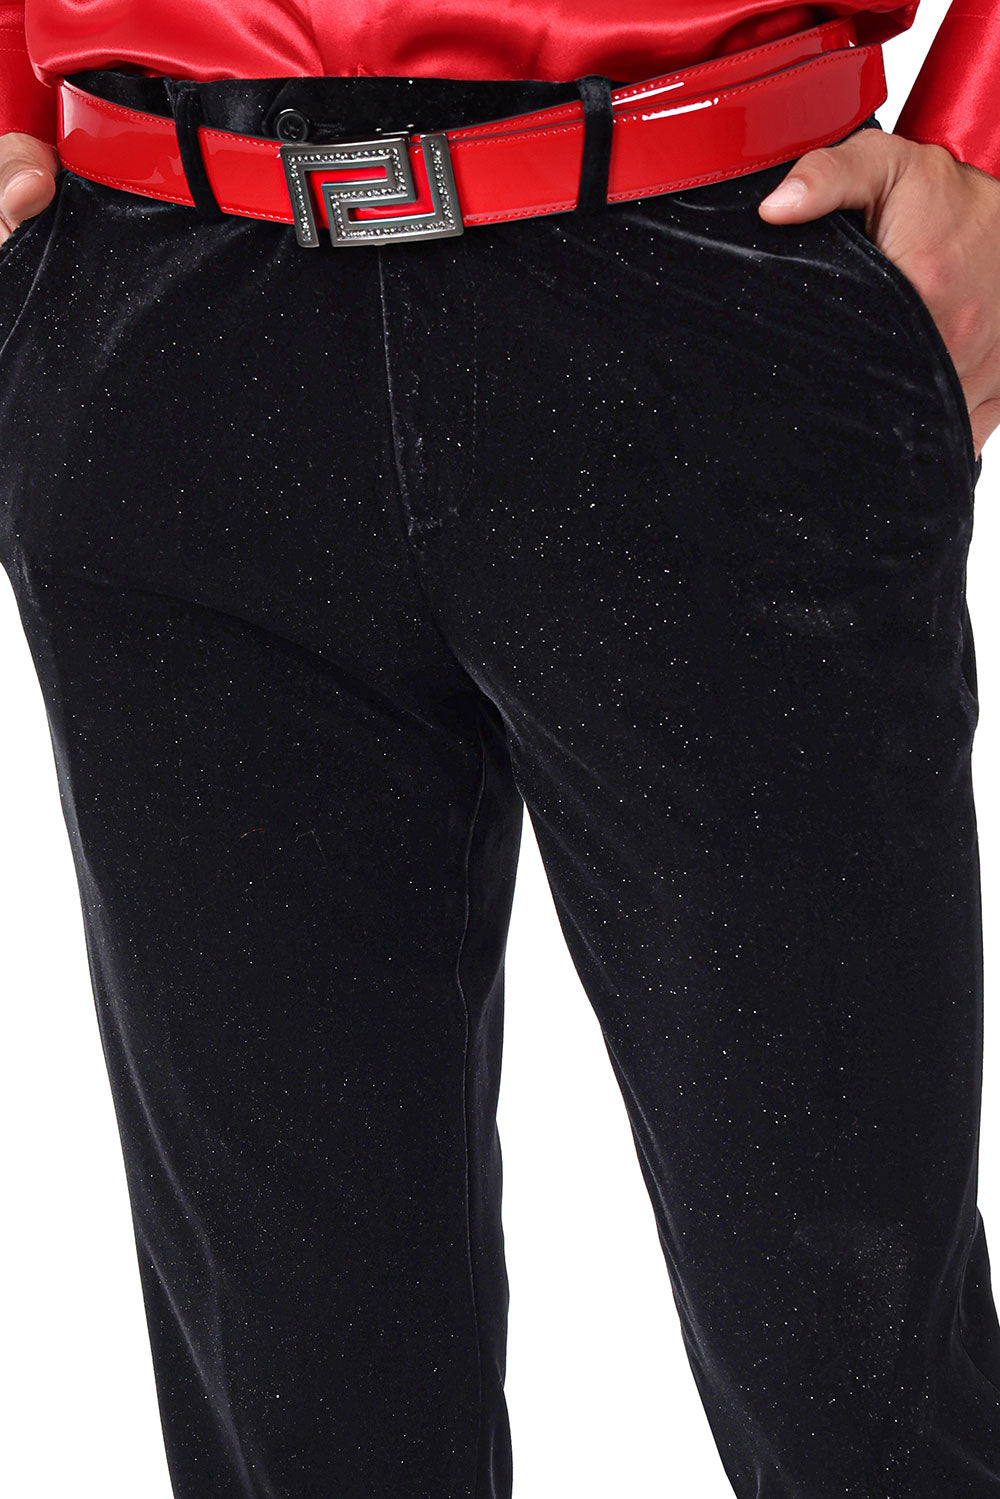 BARABAS Men's Solid With Sparkly Glittery Chino Pants 2CP3106 Black Gold